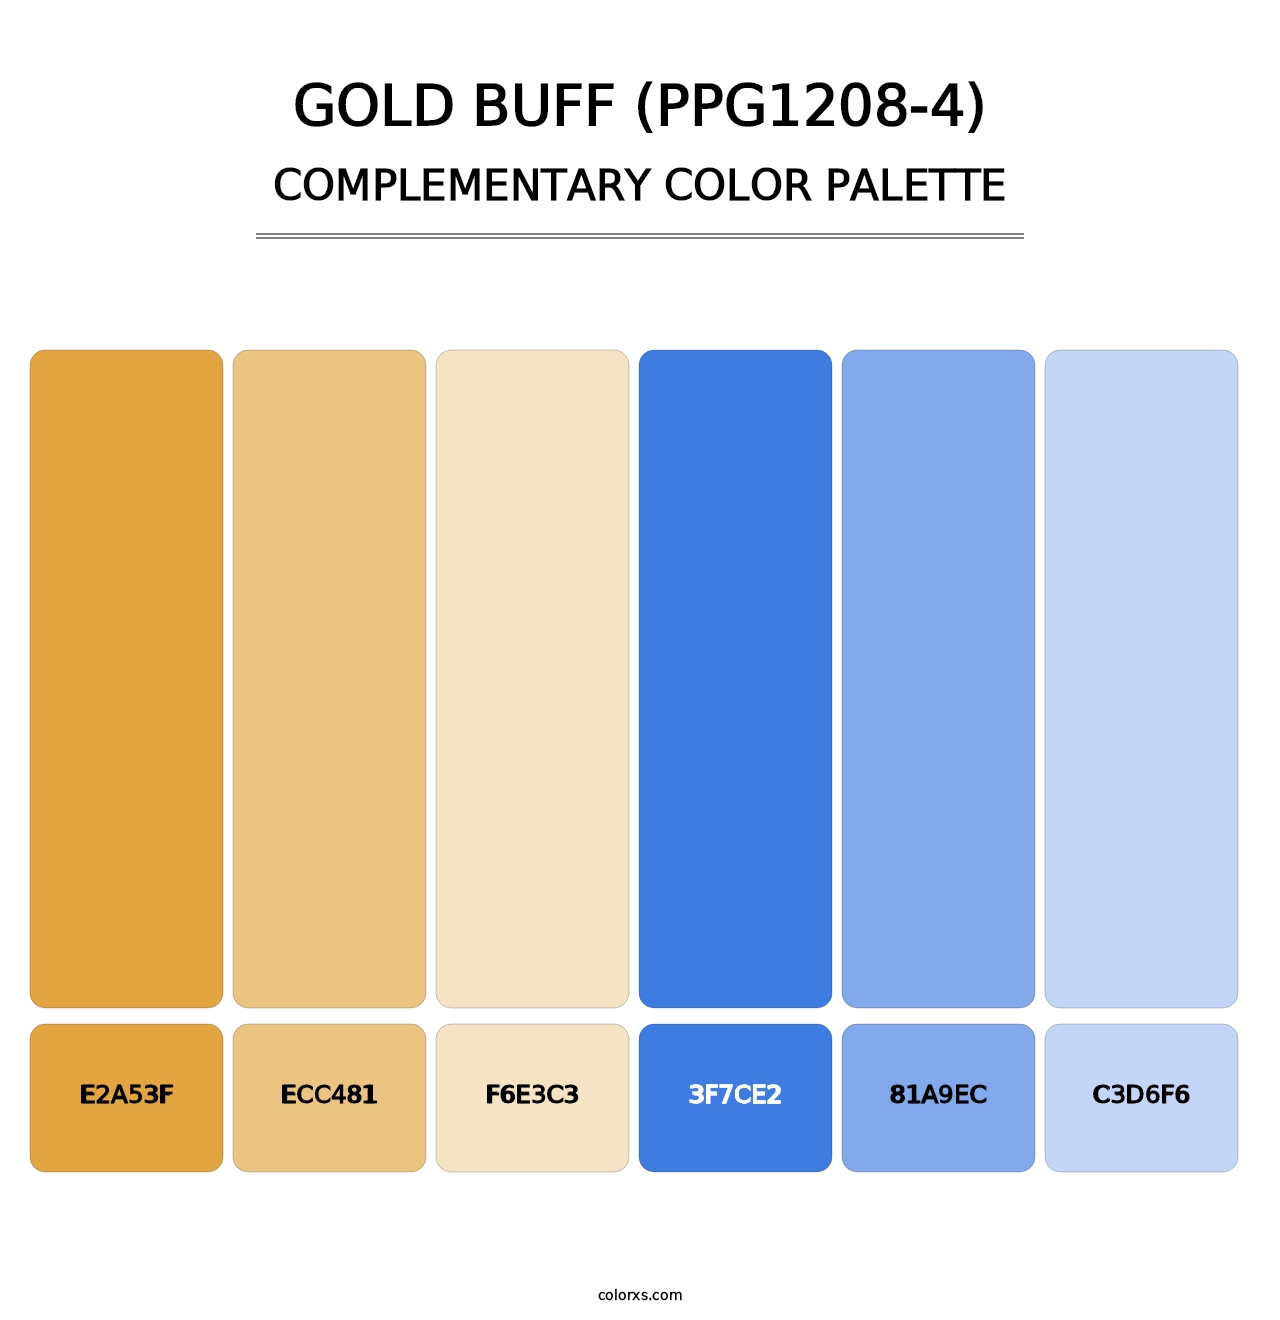 Gold Buff (PPG1208-4) - Complementary Color Palette